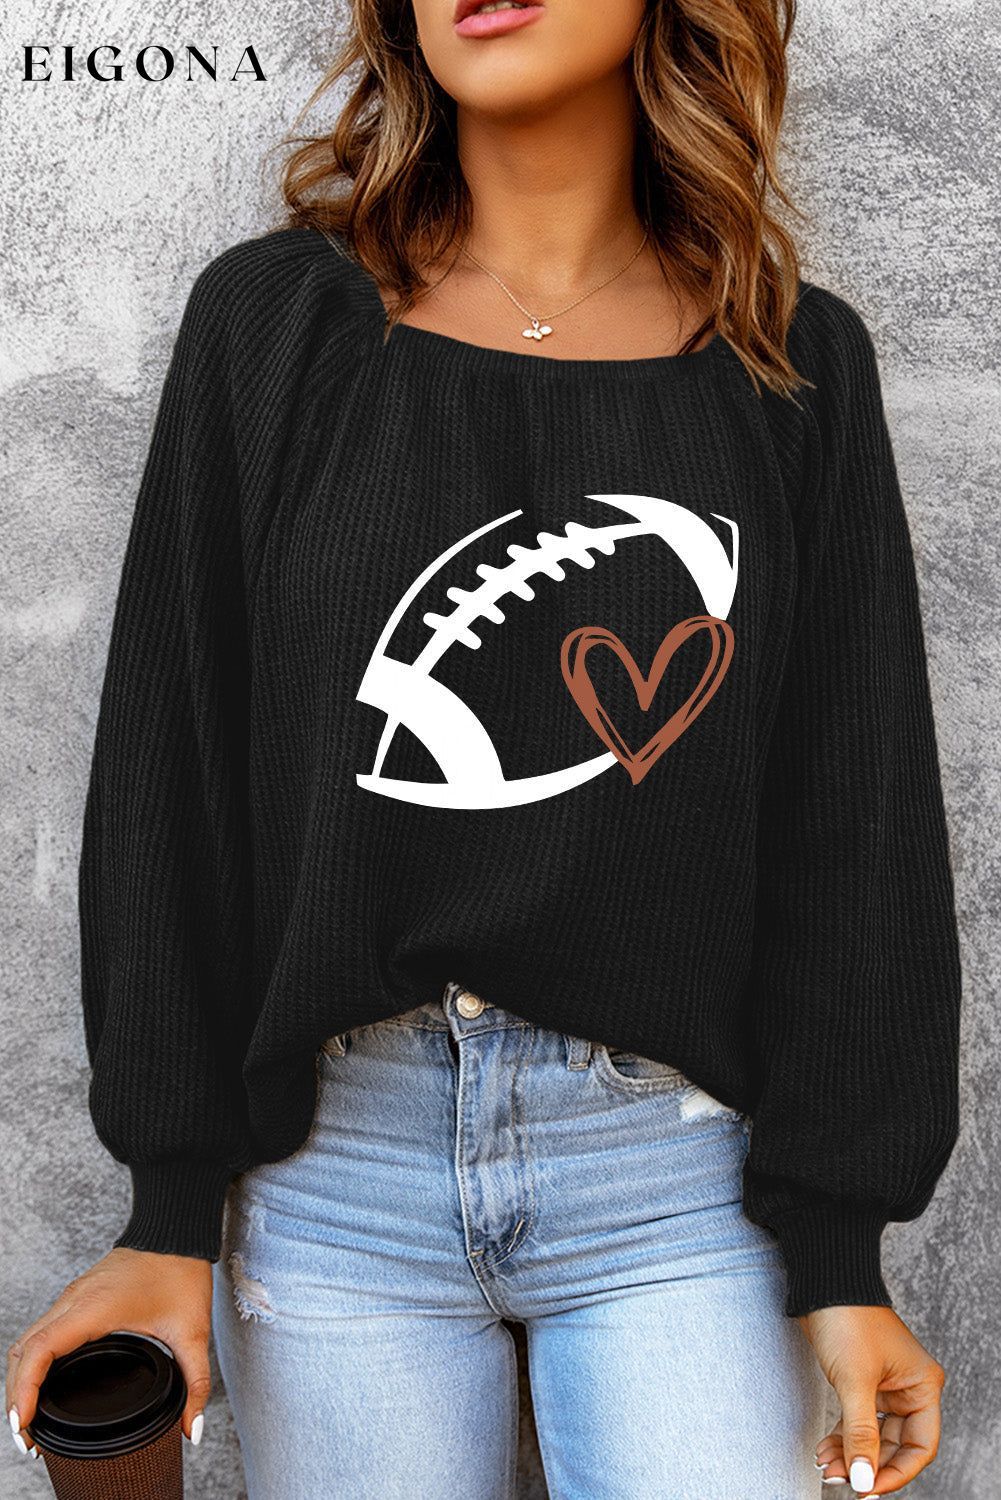 Football Graphic Ribbed Top Black clothes long sleeve shirt Ship From Overseas shirt sweatshirt SYNZ top trend